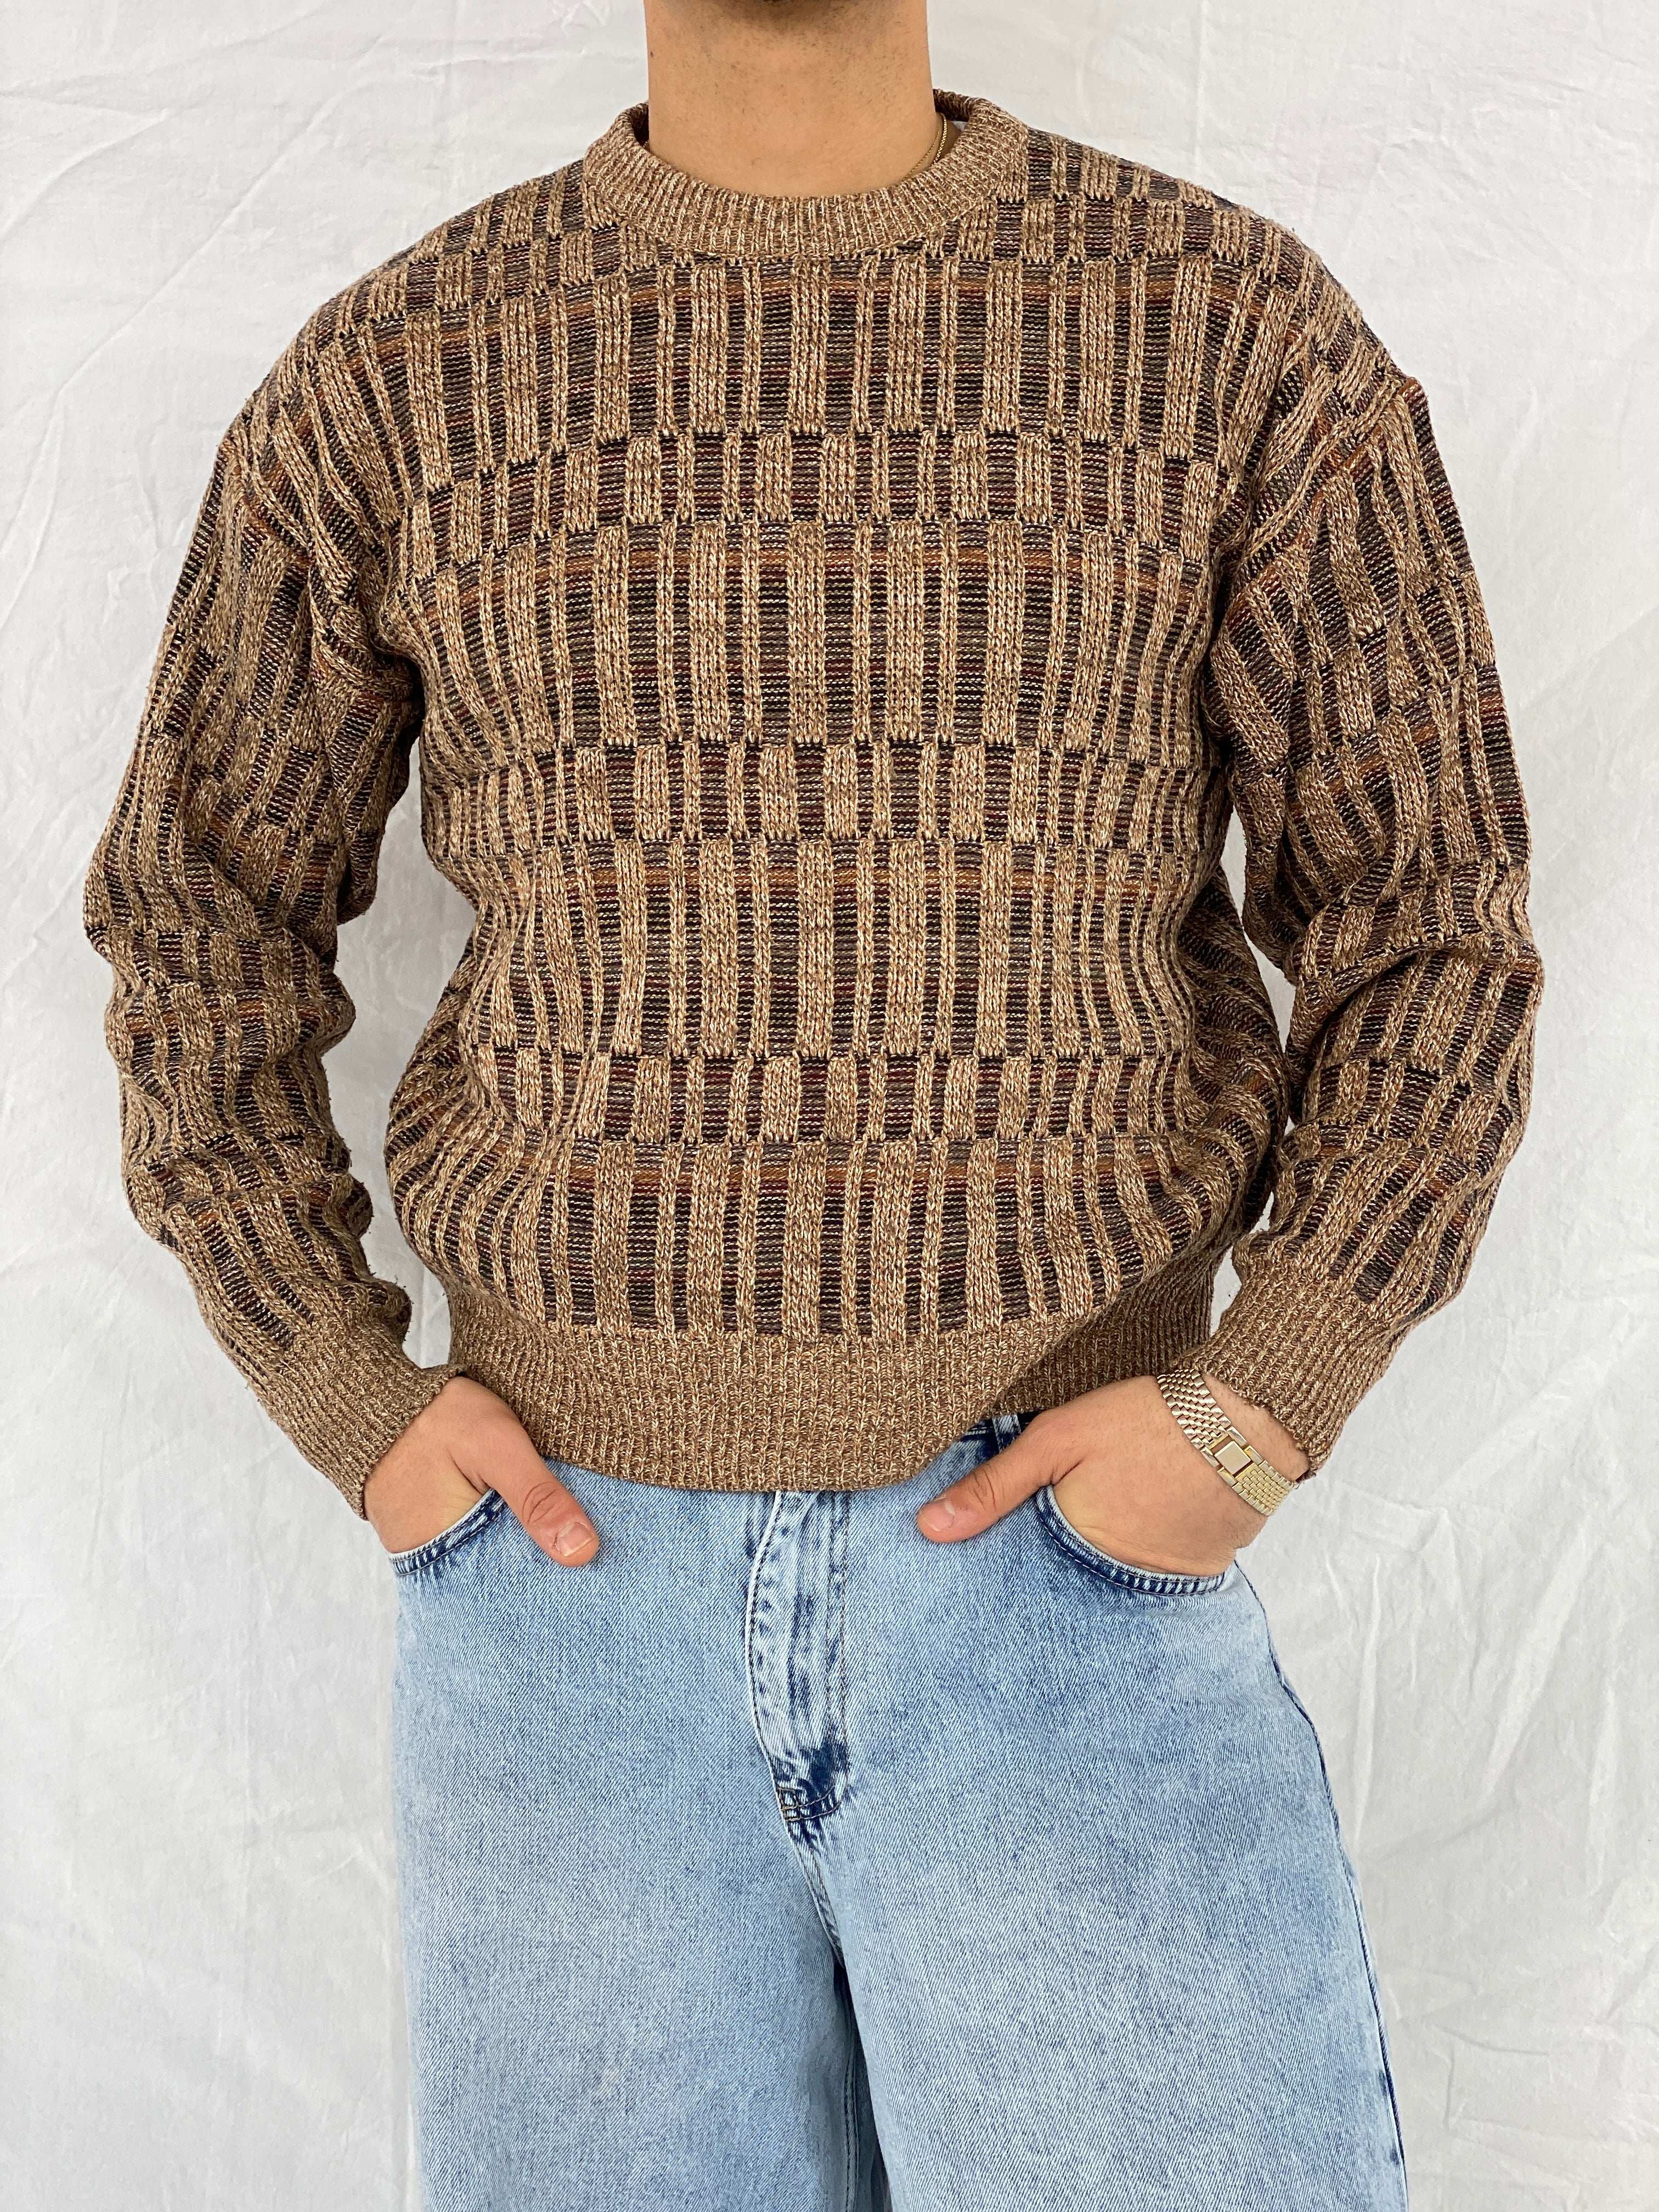 Vintage 90s David Taylor Beige And Brown Knitted Sweater - Size M - Balagan Vintage Sweater 80s, 90s, Abdullah, knitted sweater, sweater